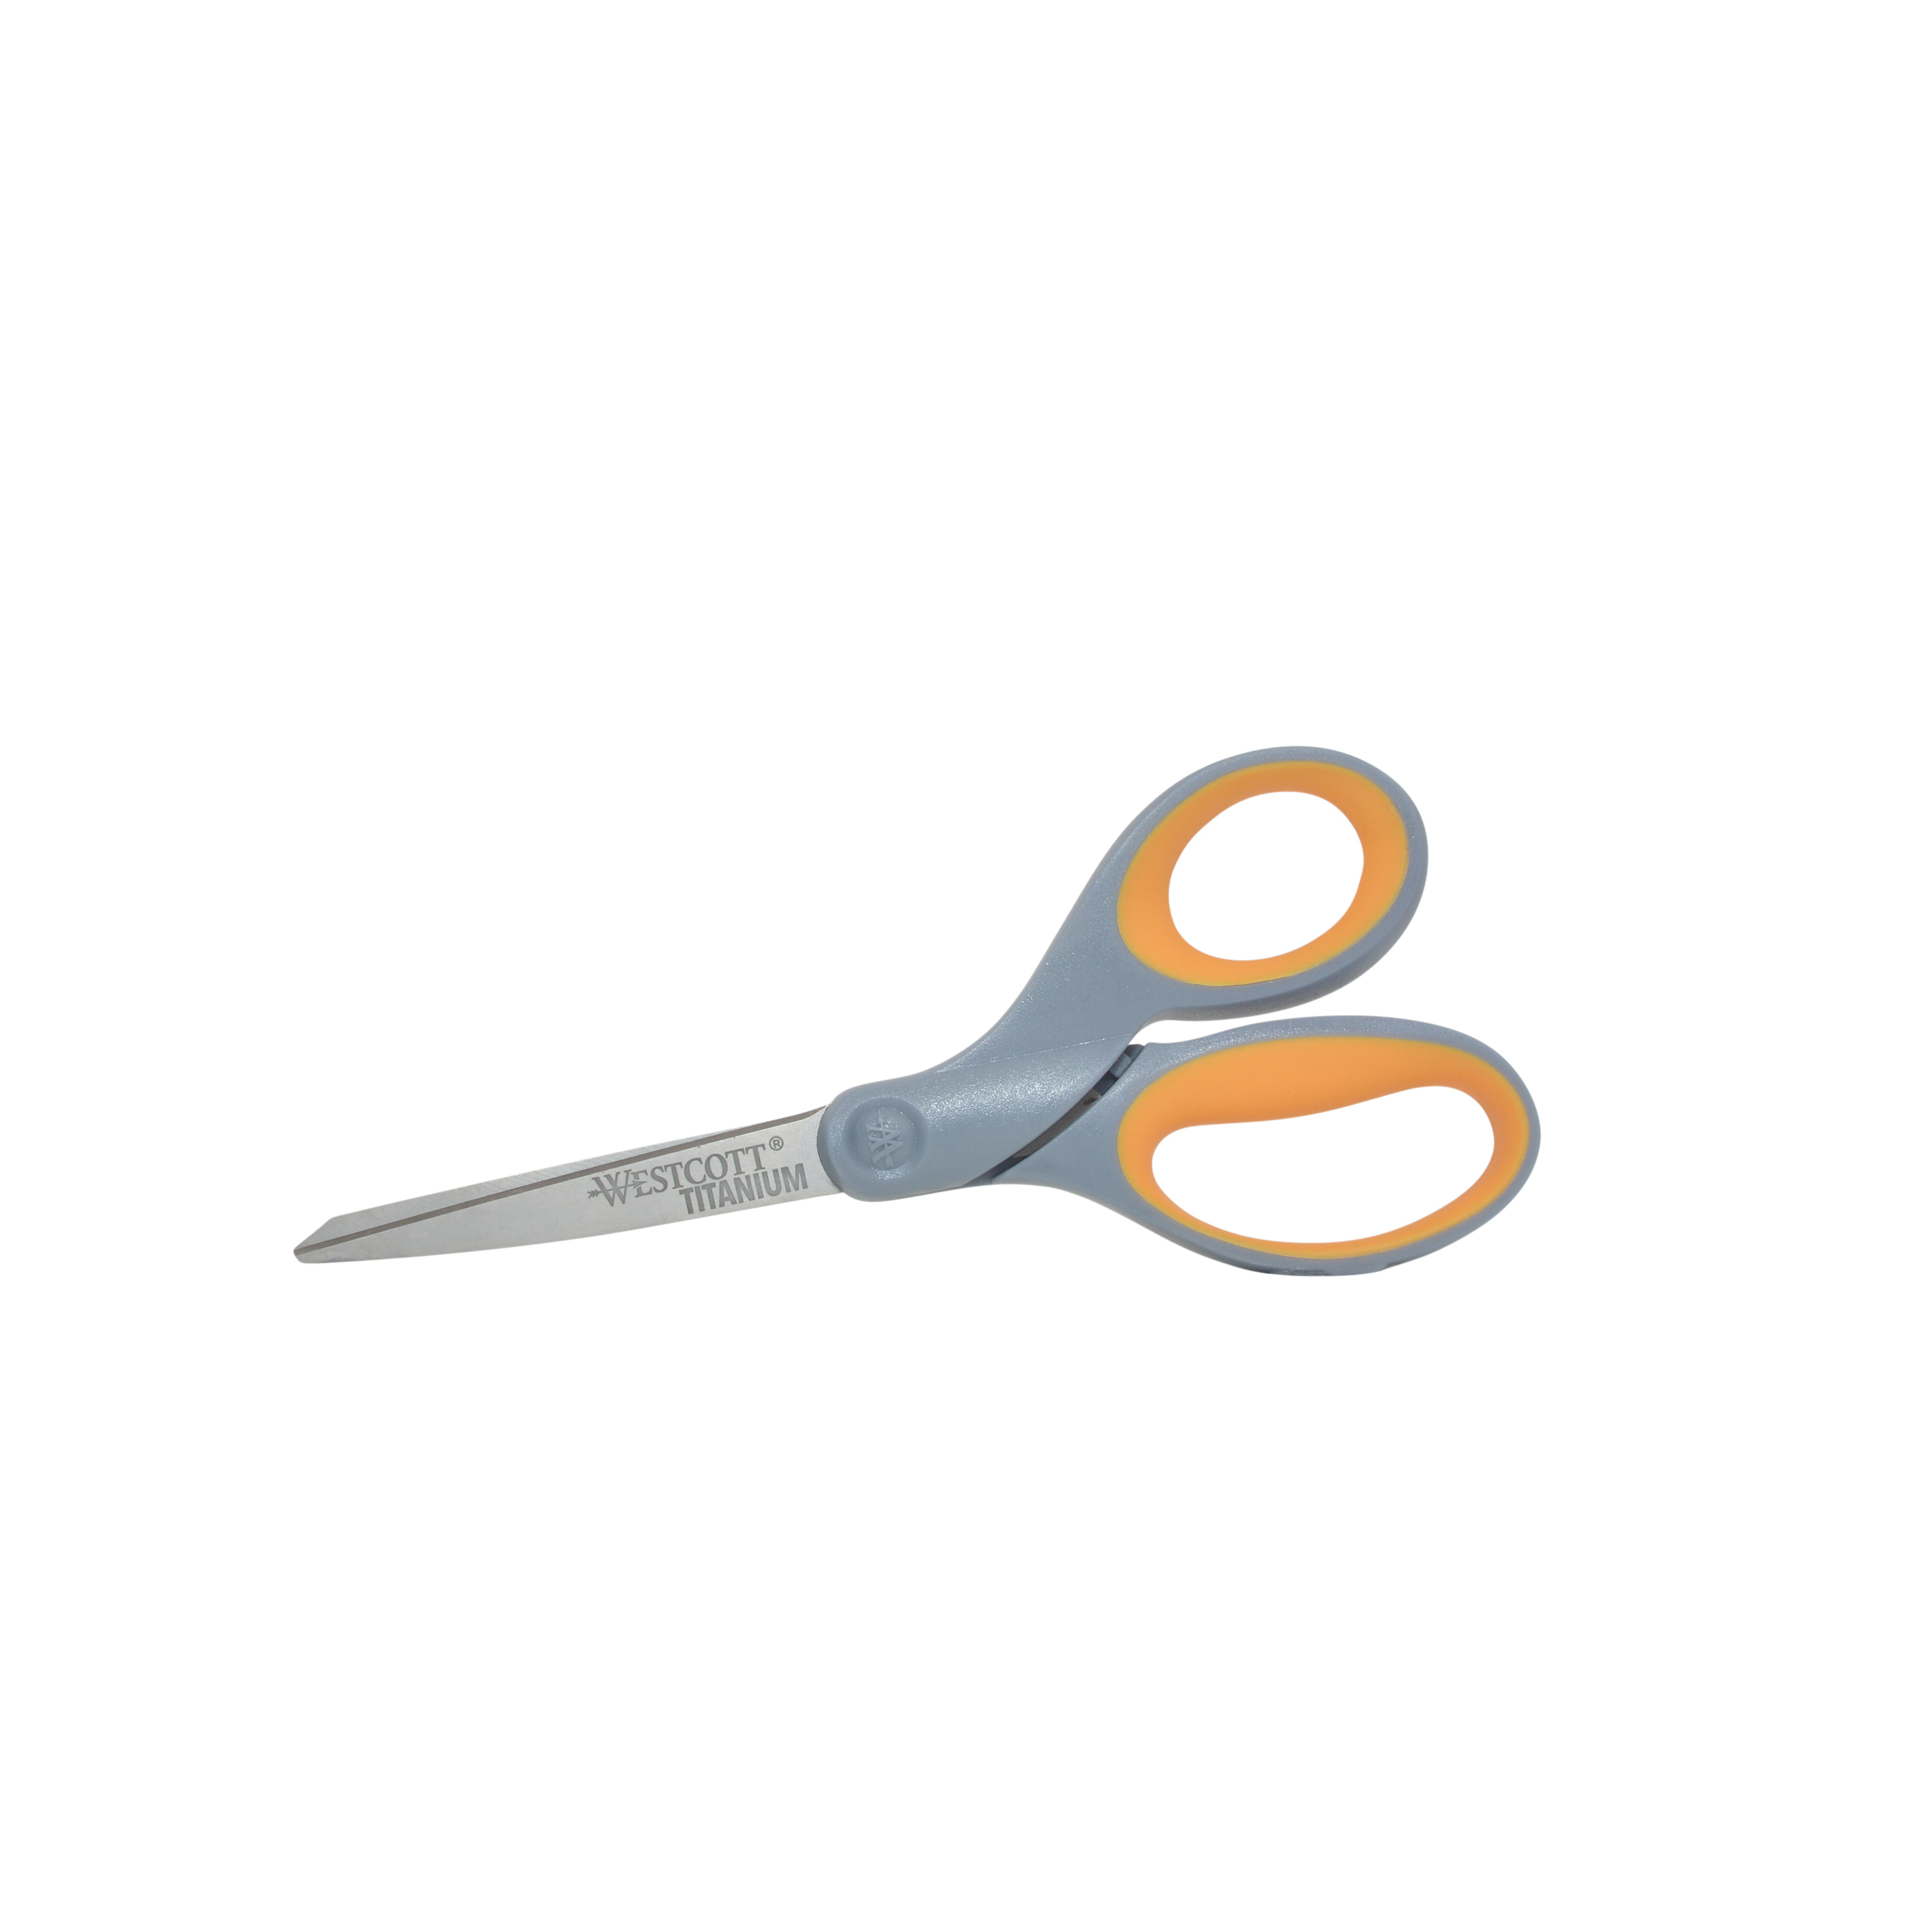 Westcott 8 Soft Handle Titanium Bonded Scissors for Office & Home, Gray/Yellow, 4 Pack (17598)